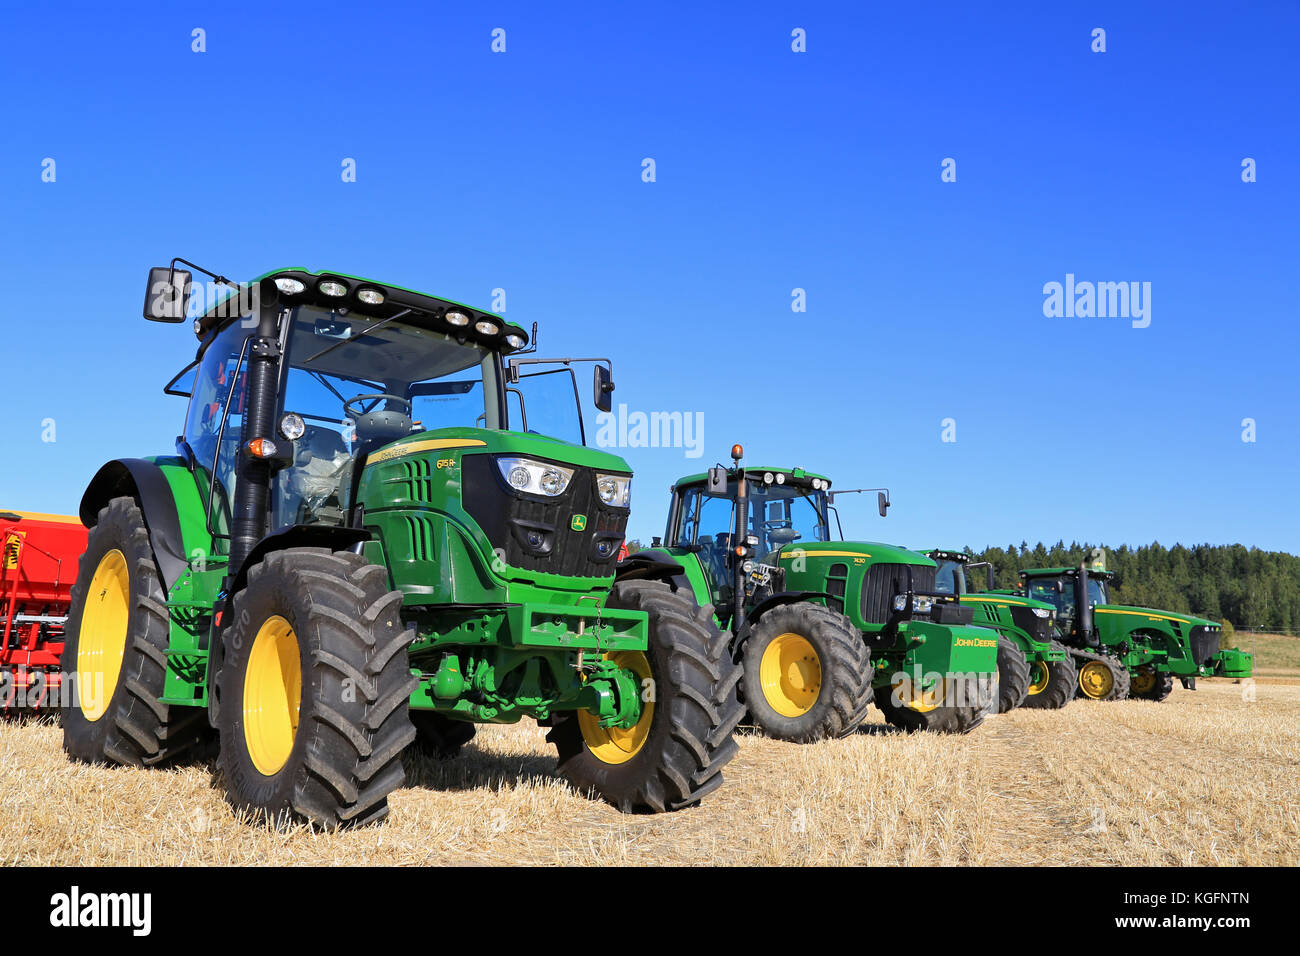 SALO, FINLAND - AUGUST 22, 2015: Line up of four John Deere agricultural tractors, 6115R and 7340 on the left, at Puontin Peltopaivat Agricultural Har Stock Photo